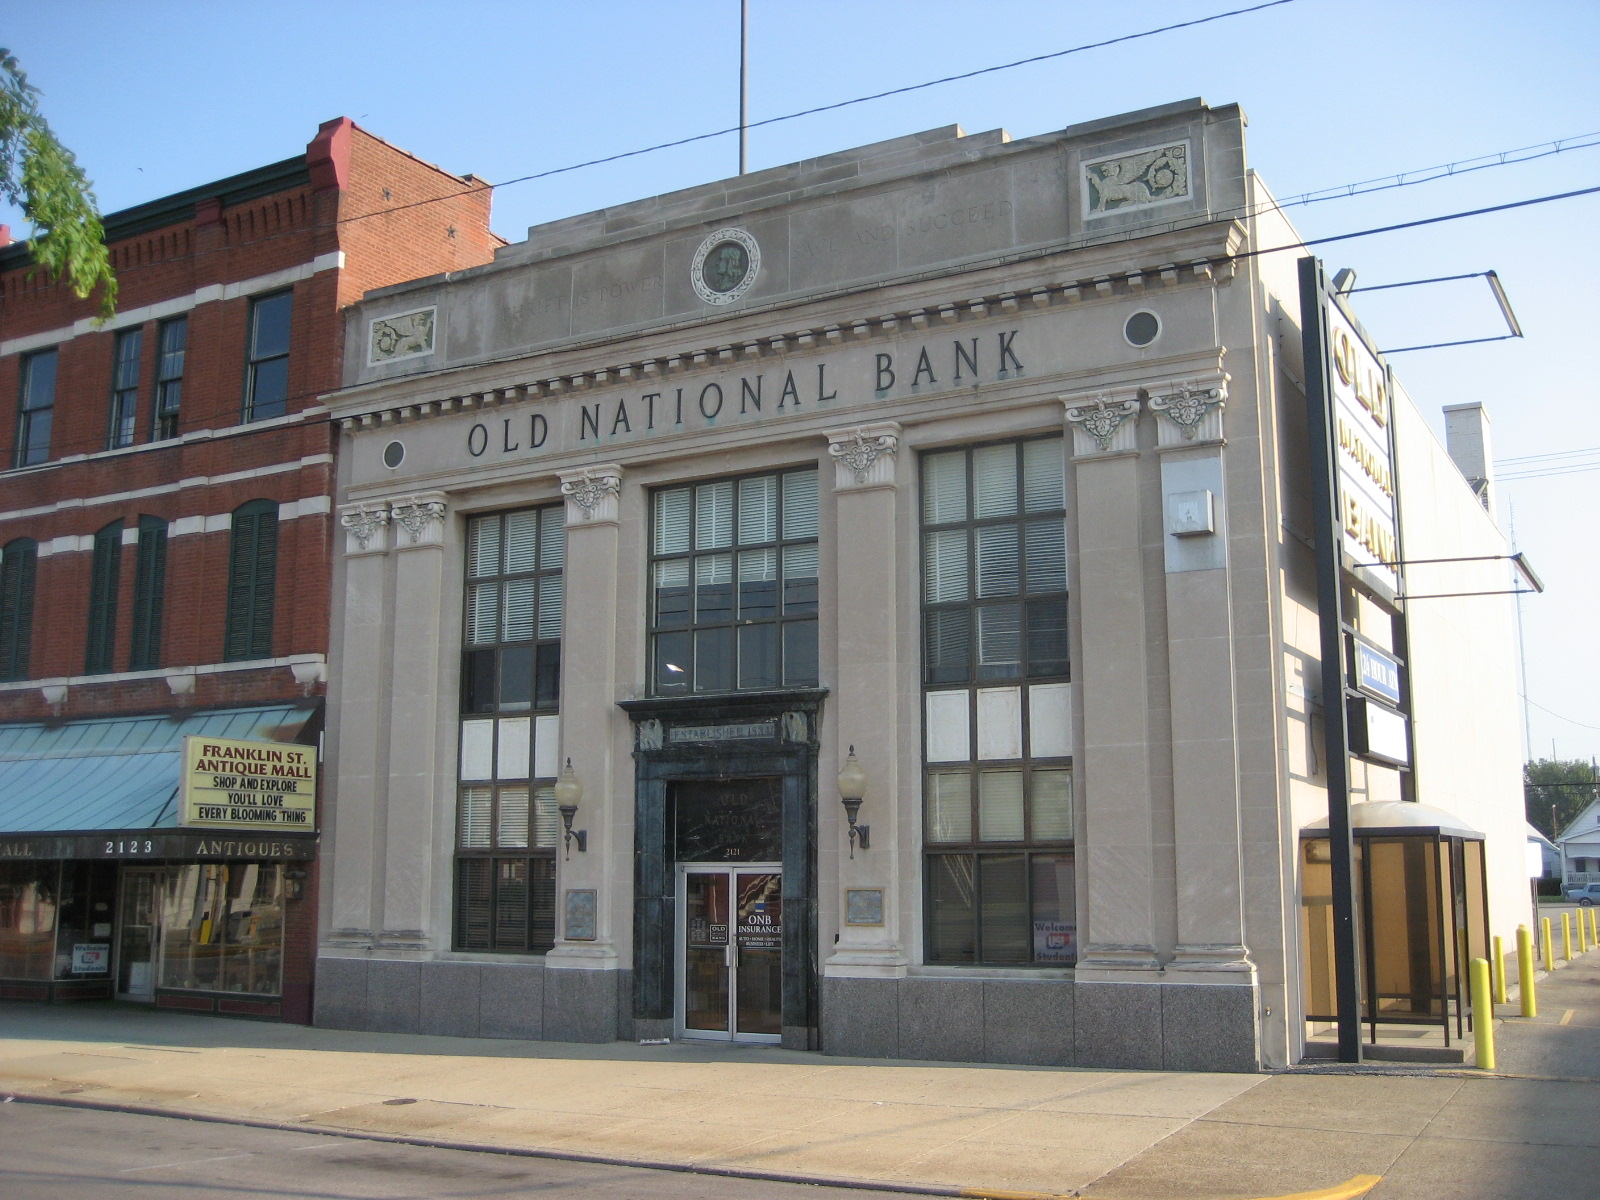 Franklin Bank and Trust